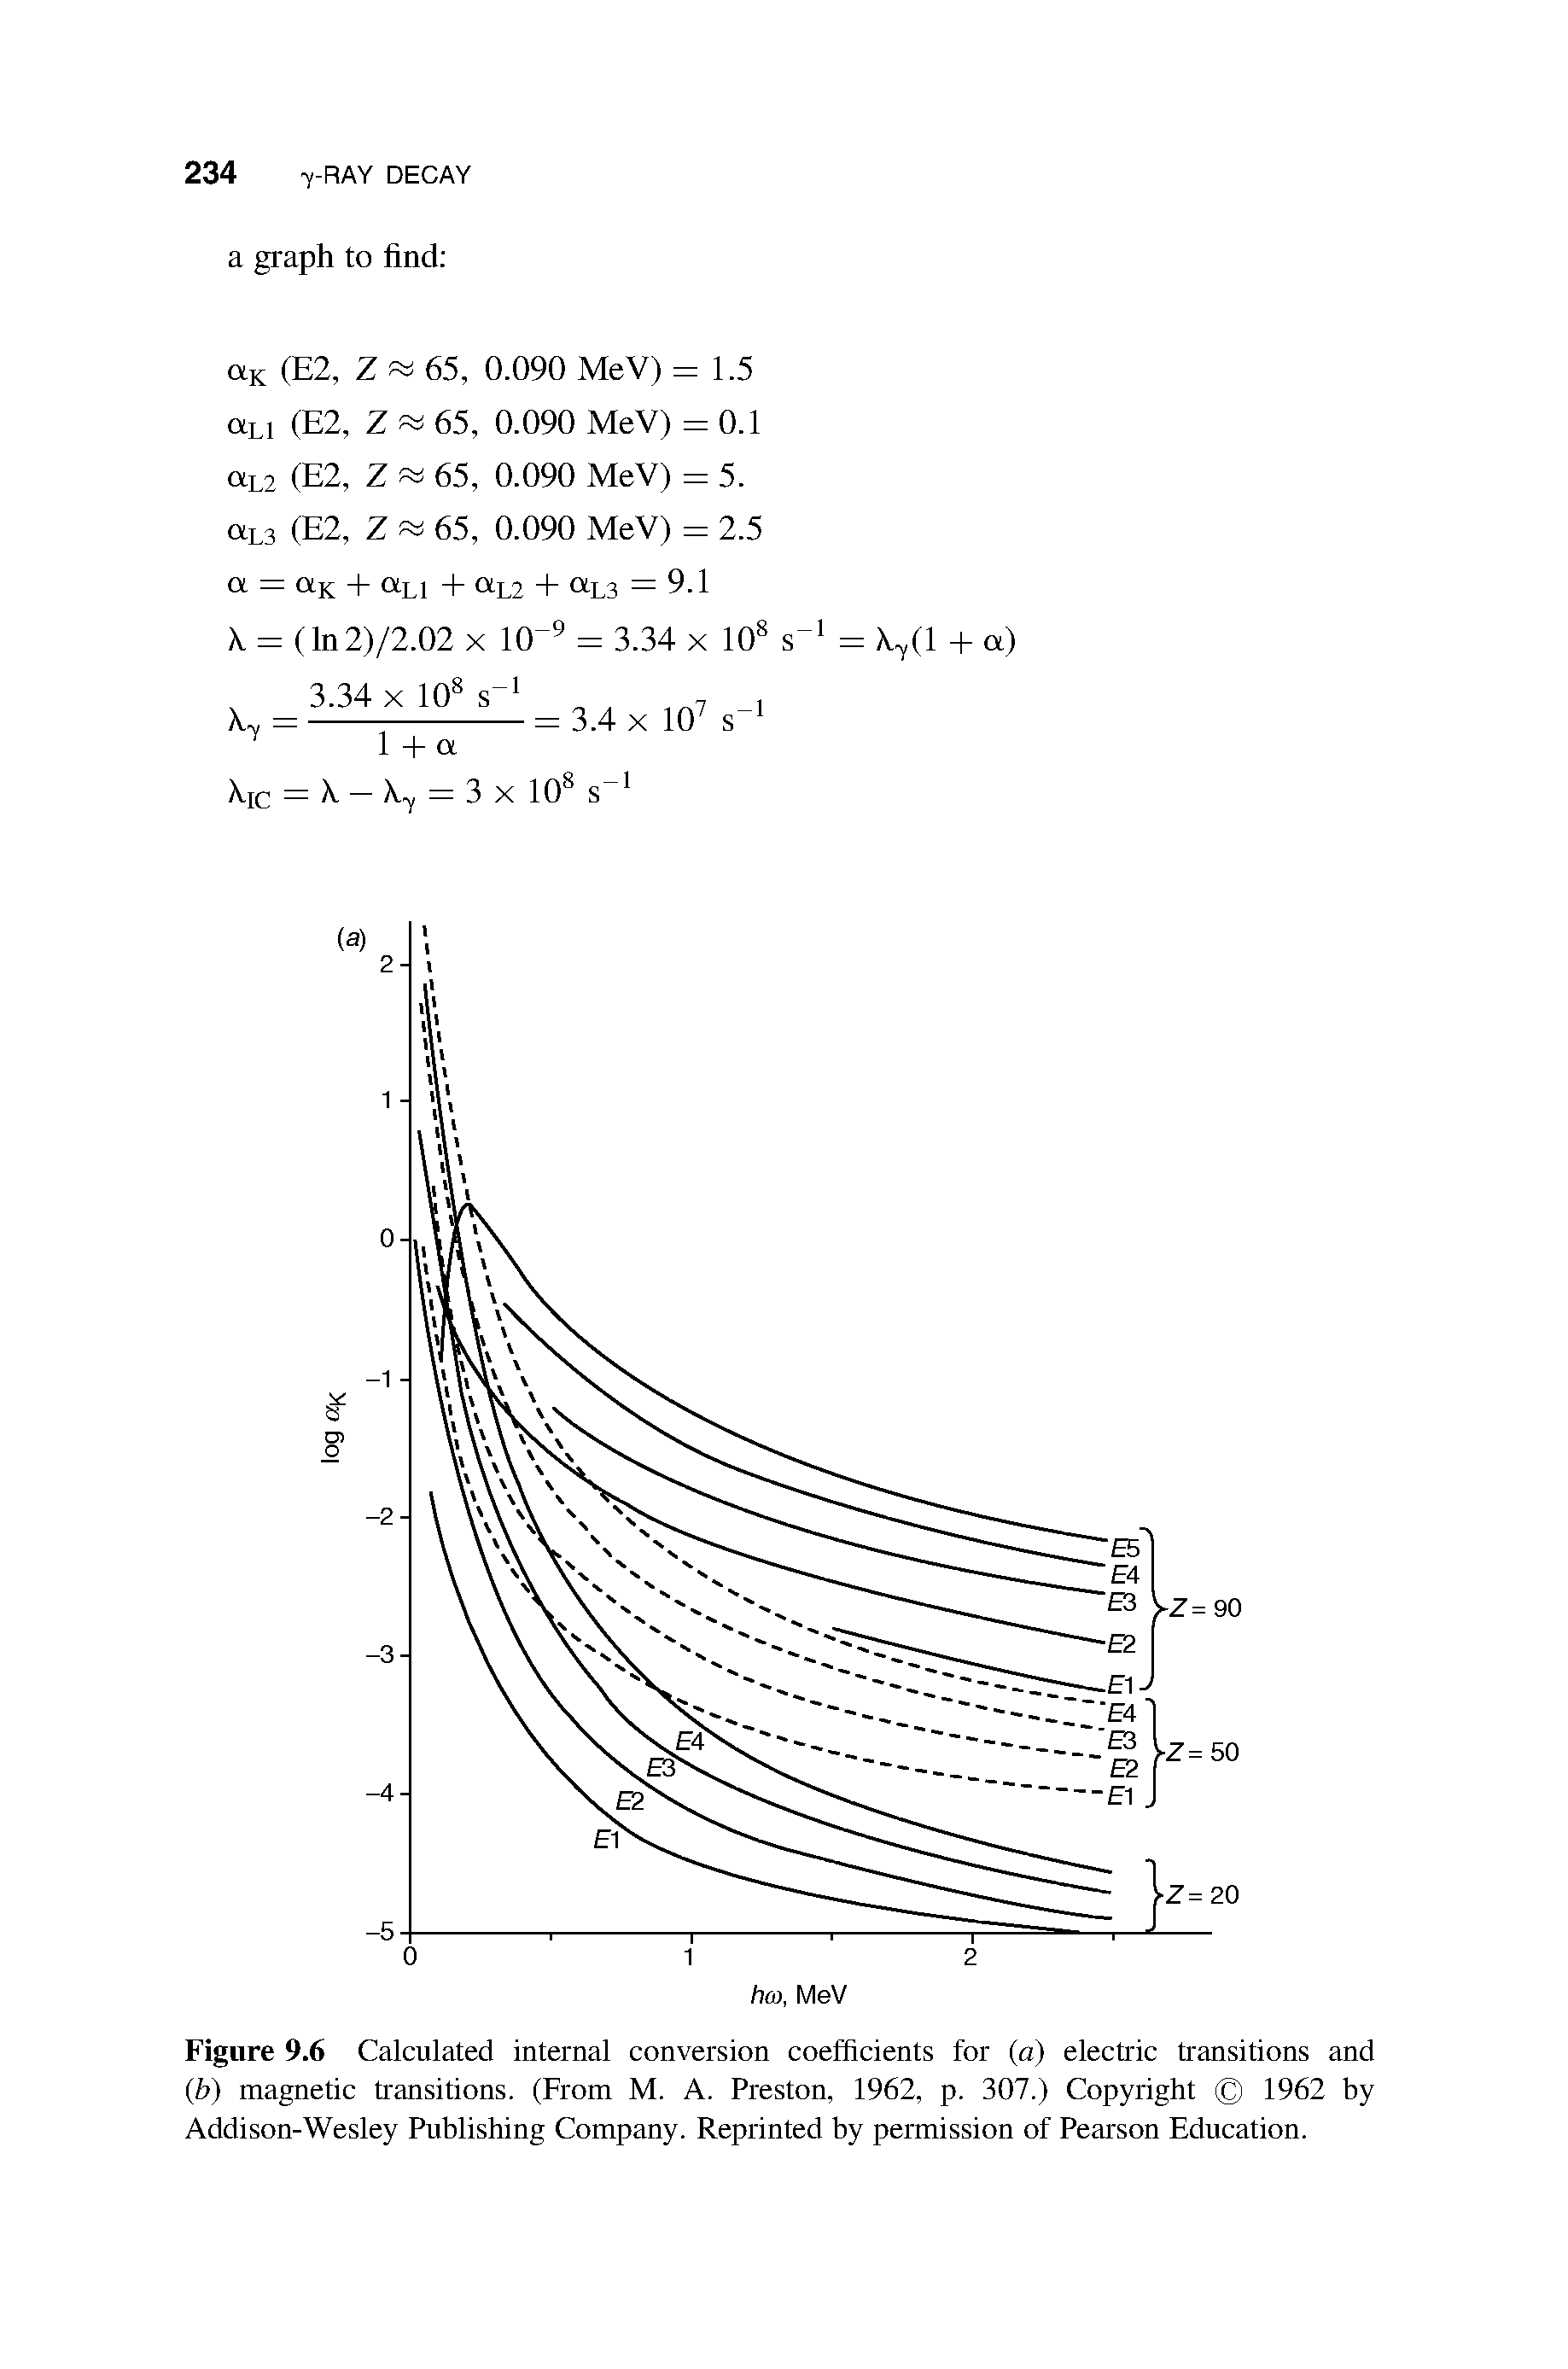 Figure 9.6 Calculated internal conversion coefficients for (a) electric transitions and (b) magnetic transitions. (From M. A. Preston, 1962, p. 307.) Copyright 1962 by Addison-Wesley Publishing Company. Reprinted by permission of Pearson Education.